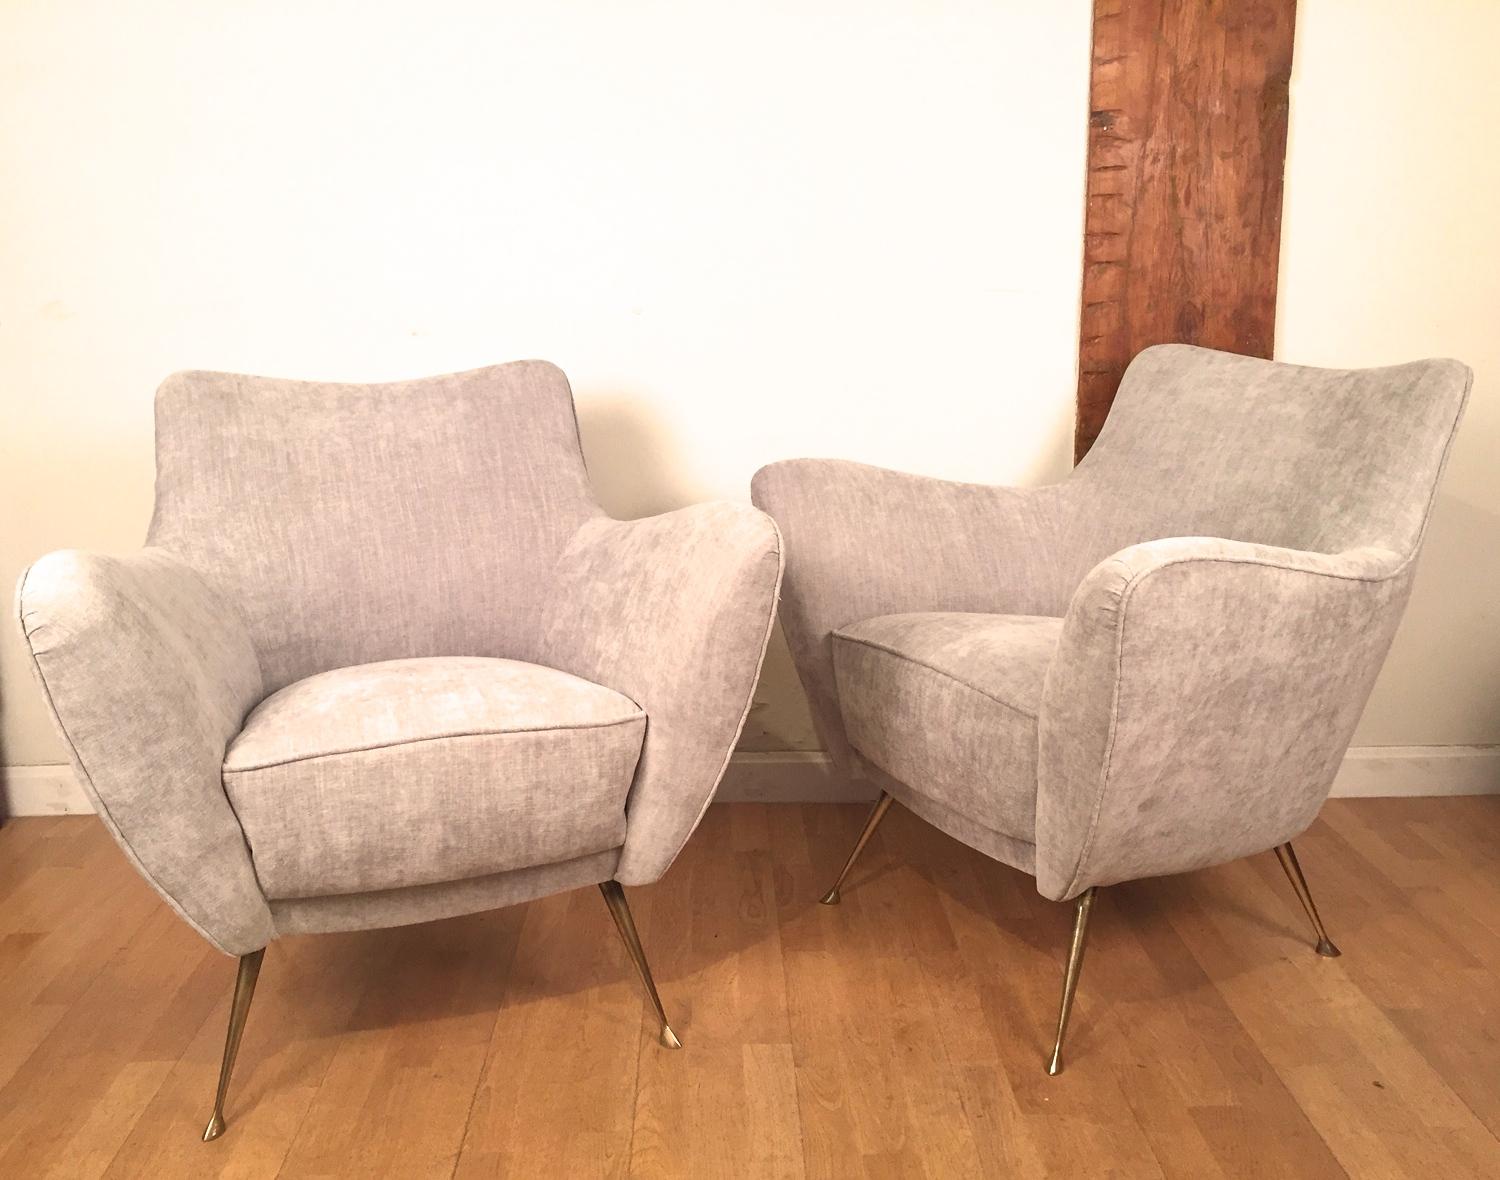 A pair of Italian 1950s vintage armchairs, in the style of Ico Parisi. Reupholstered in gray velvet. Brass legs. Excellent condition.